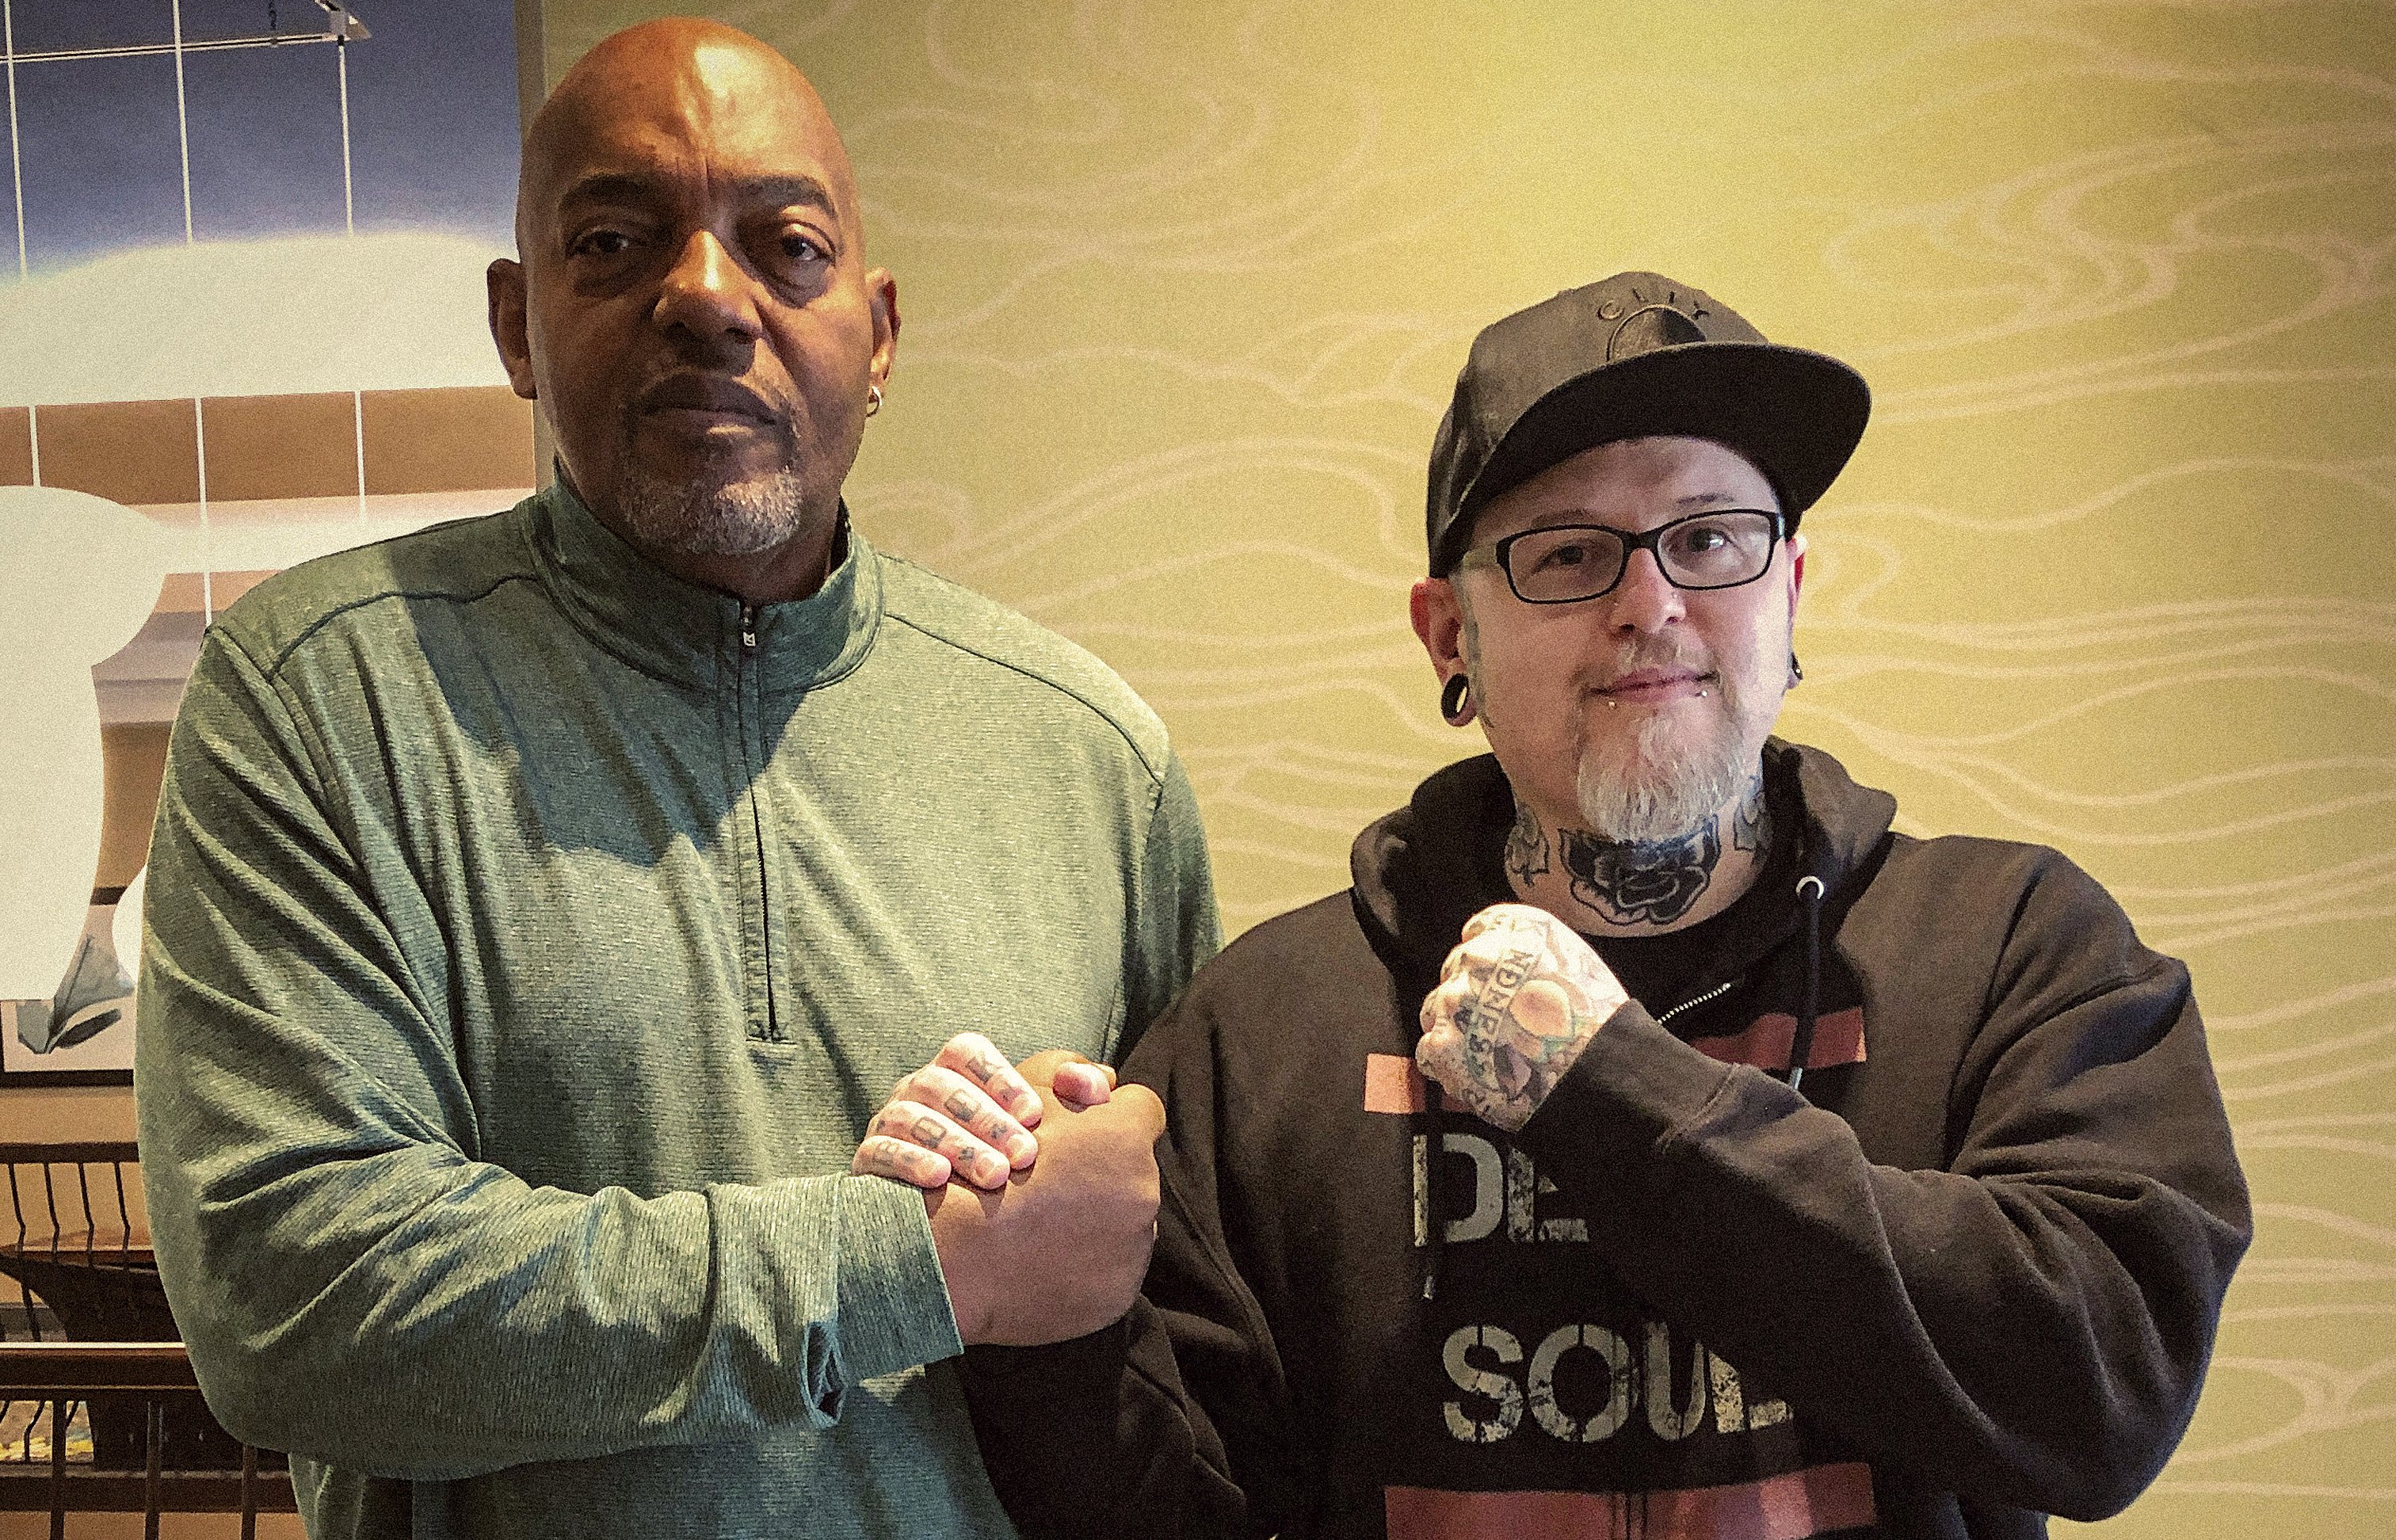 Horror icon, Ken Foree, joins Chris to discuss his legendary acting career, African Americans in cinema, helping his mom with yoga, and facing discrimination.